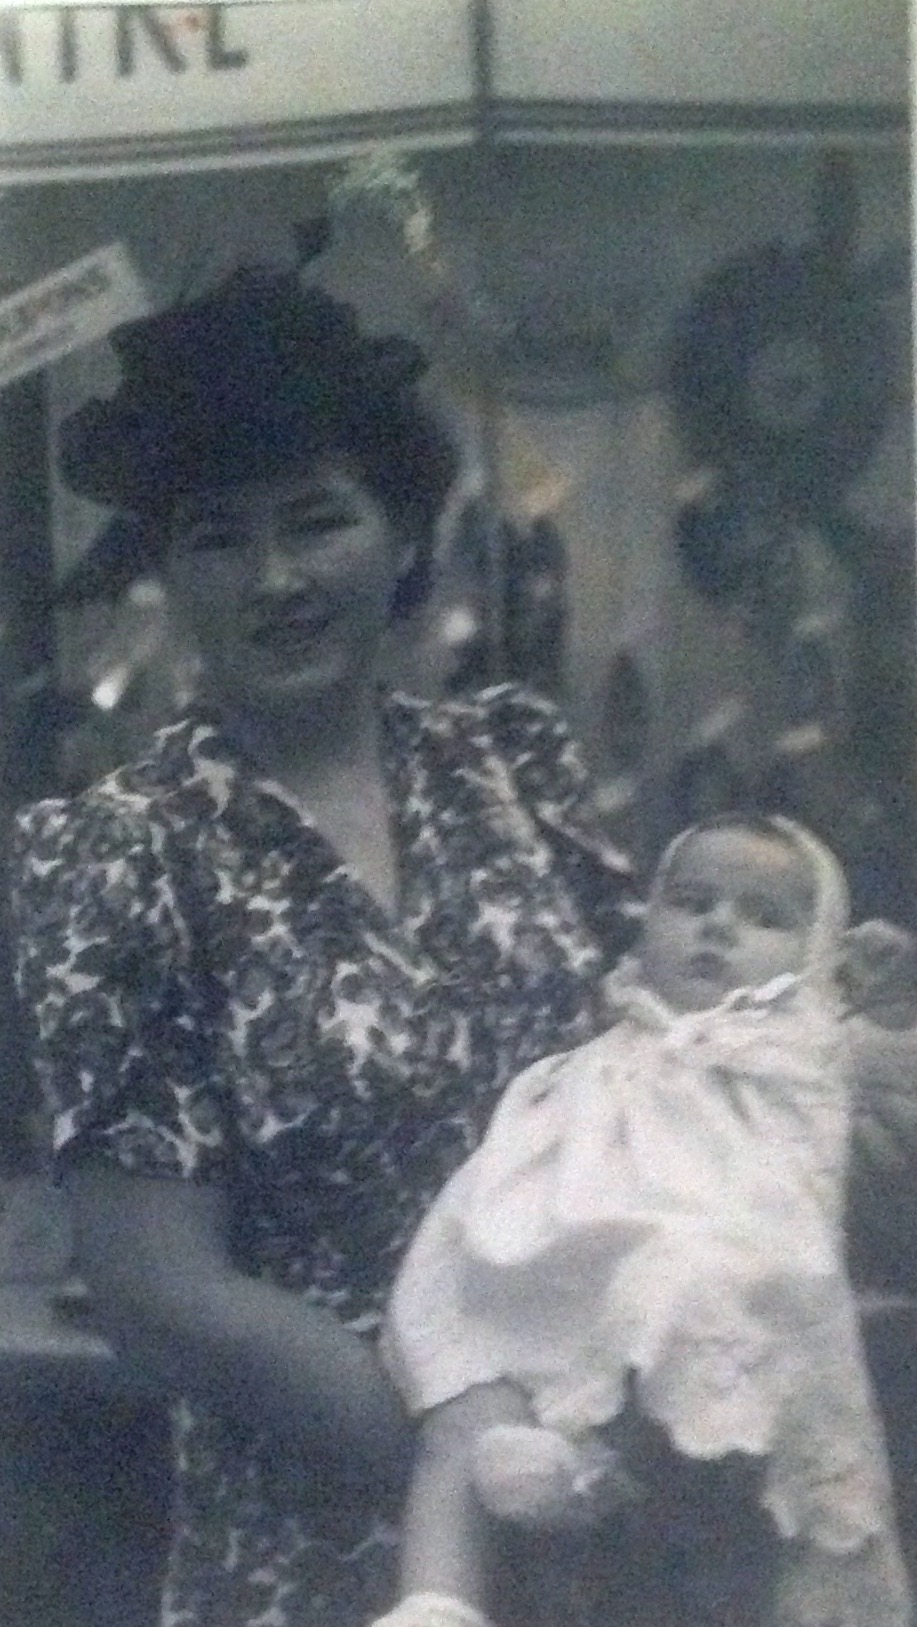 My mum holding me. Probably taken by a street photographer. I was born in July 1945 so probably dated 45 or 46.